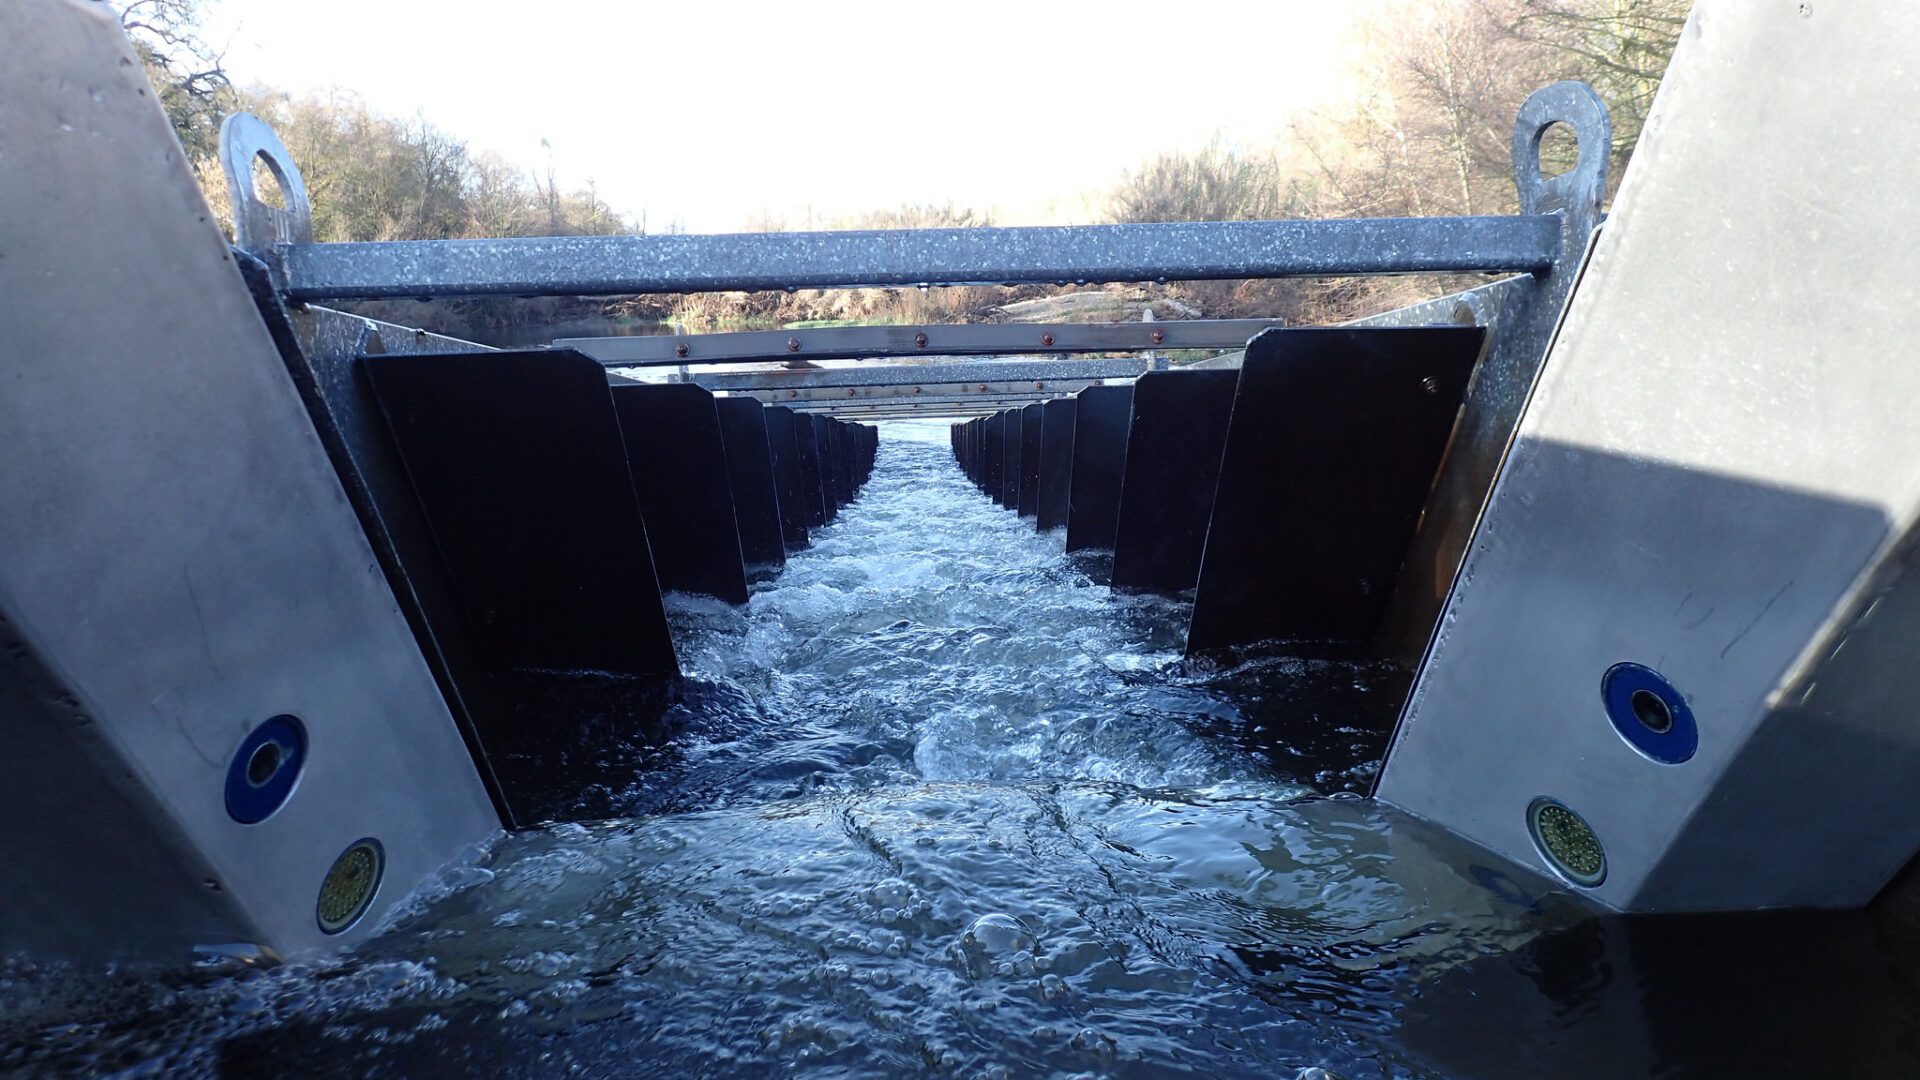 Fish ladder with cameras exposed